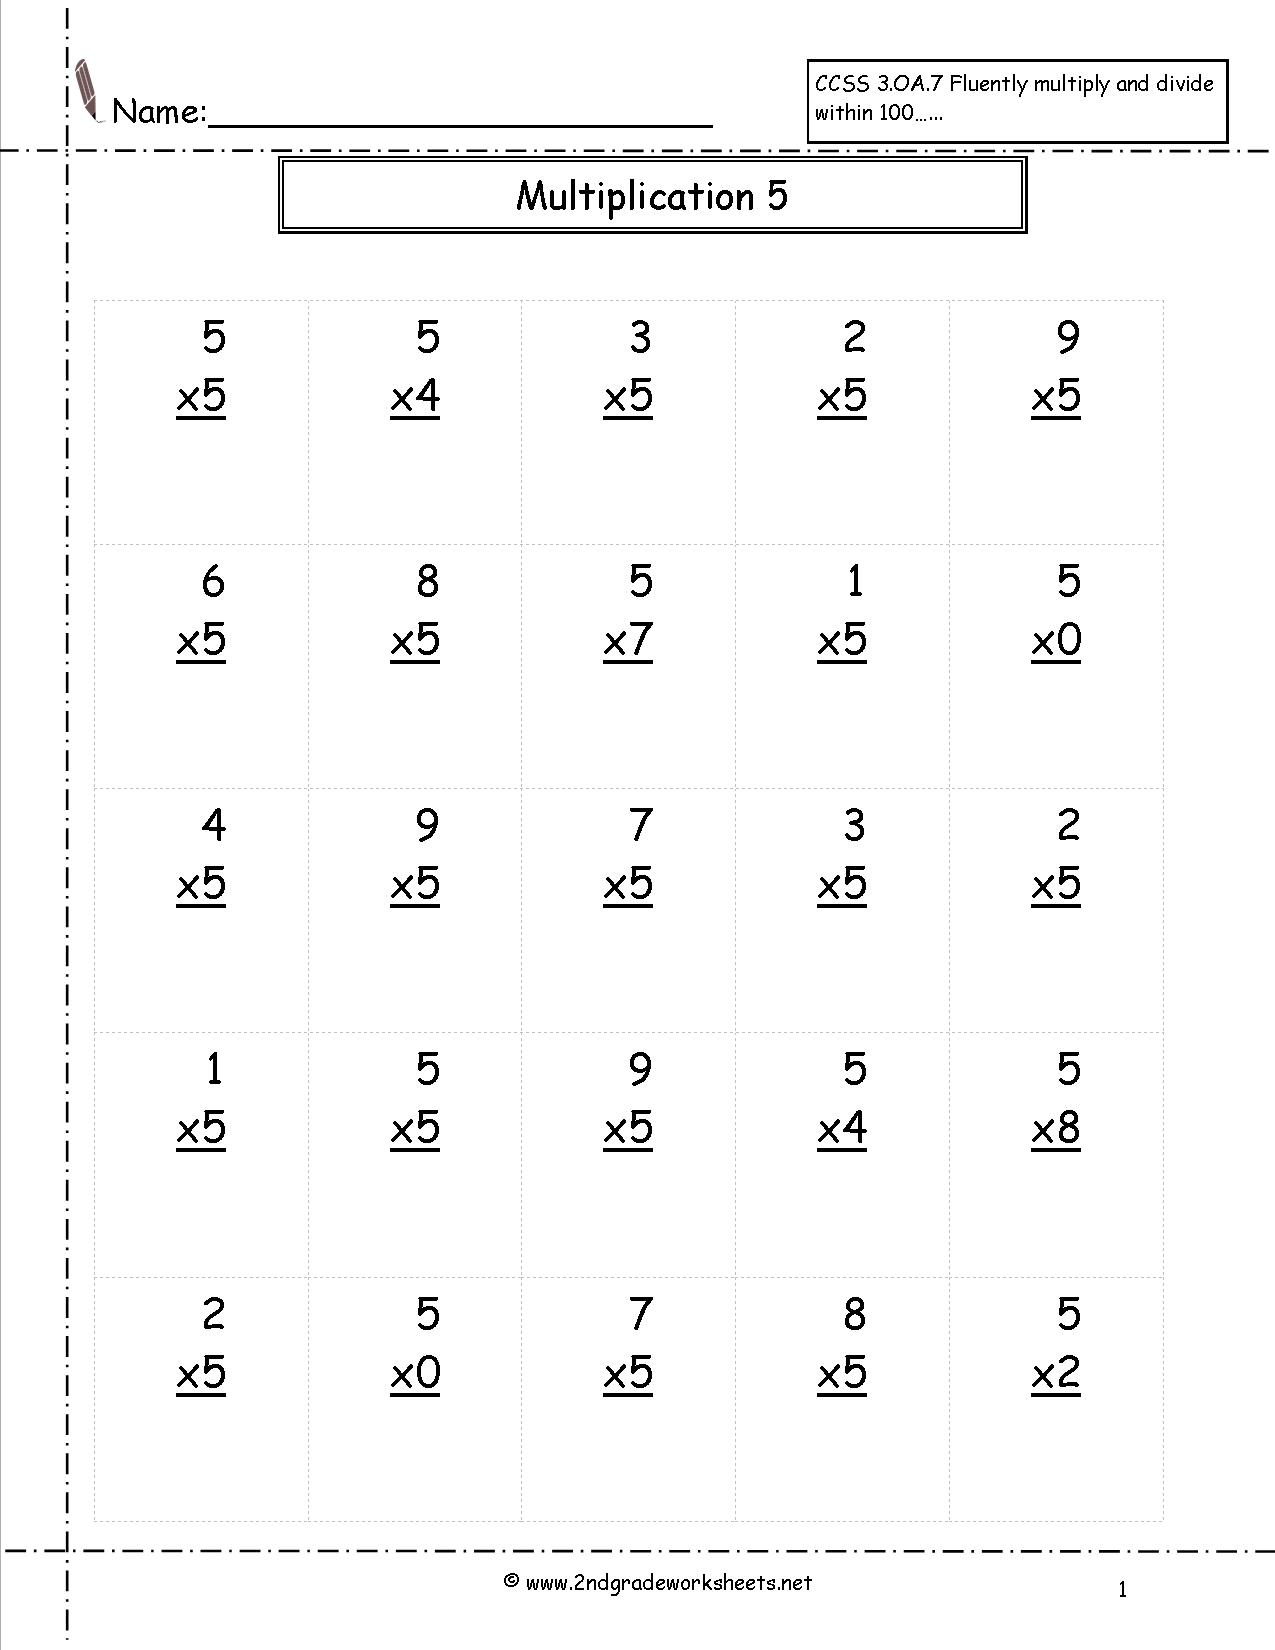 Multiplication Worksheets And Printouts with Multiplication Worksheets Number 7